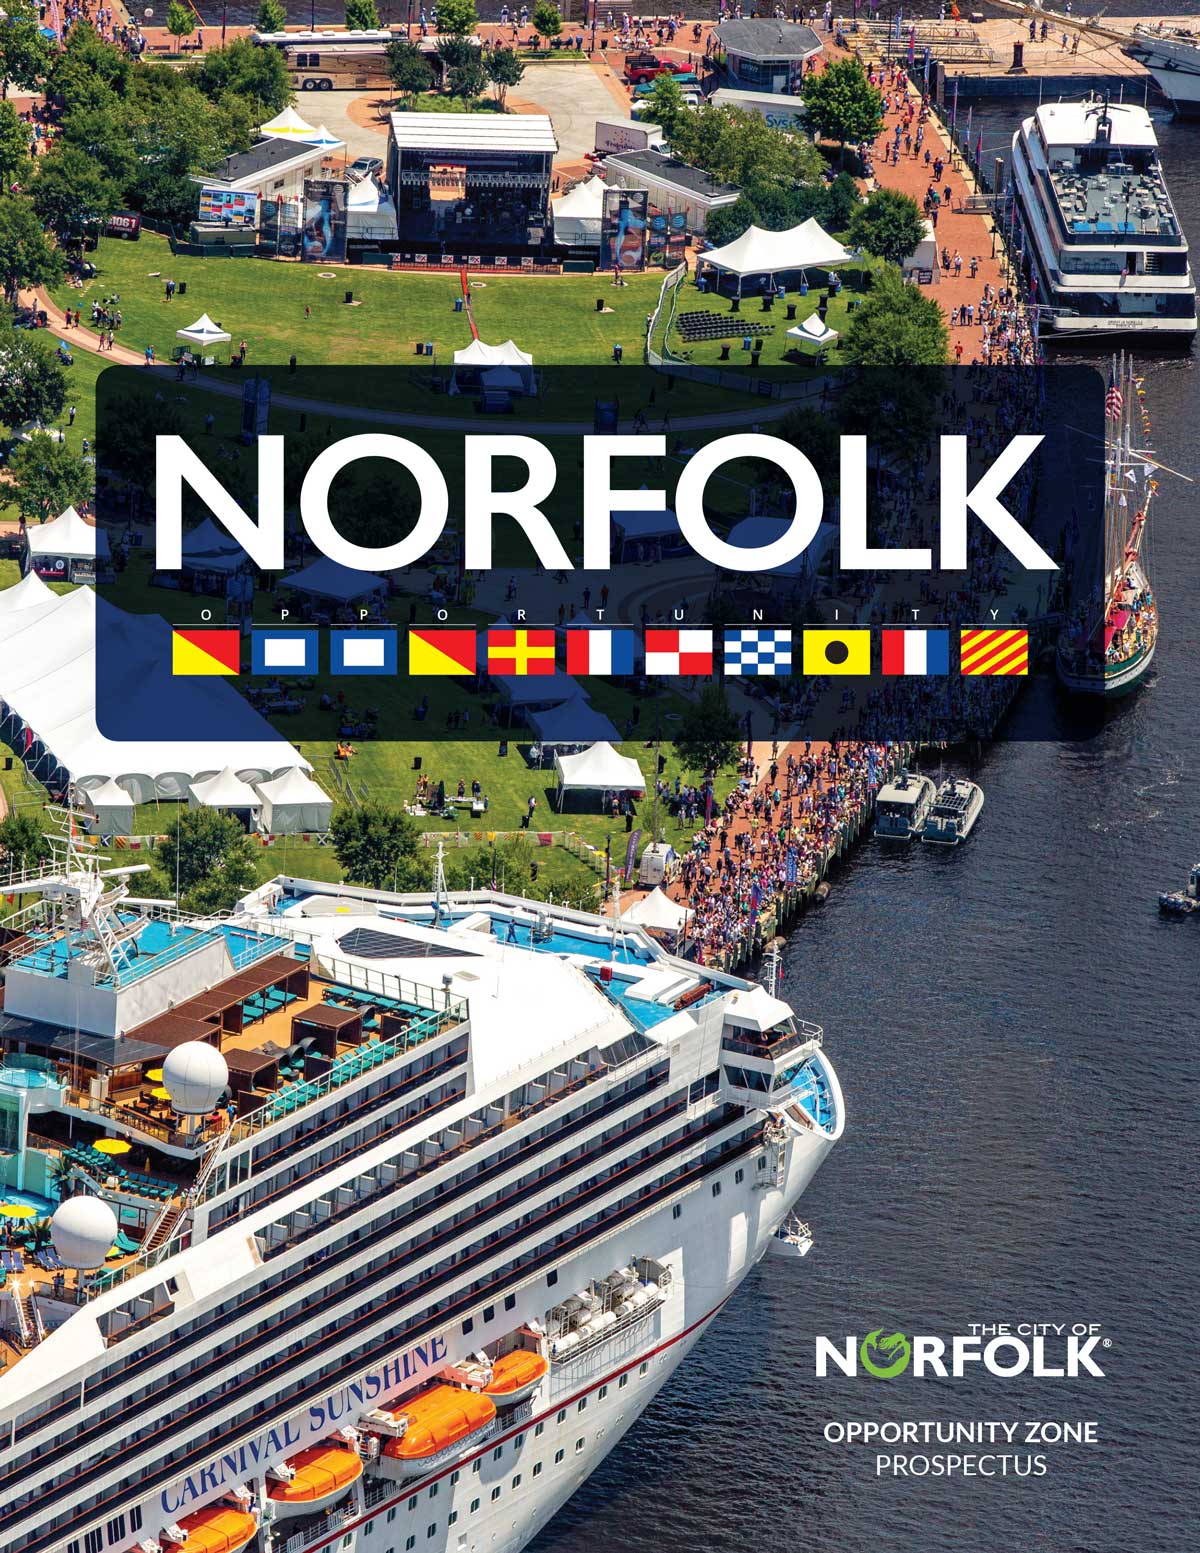 Norfolk’s Opportunity Zones Prospectus Ready to View